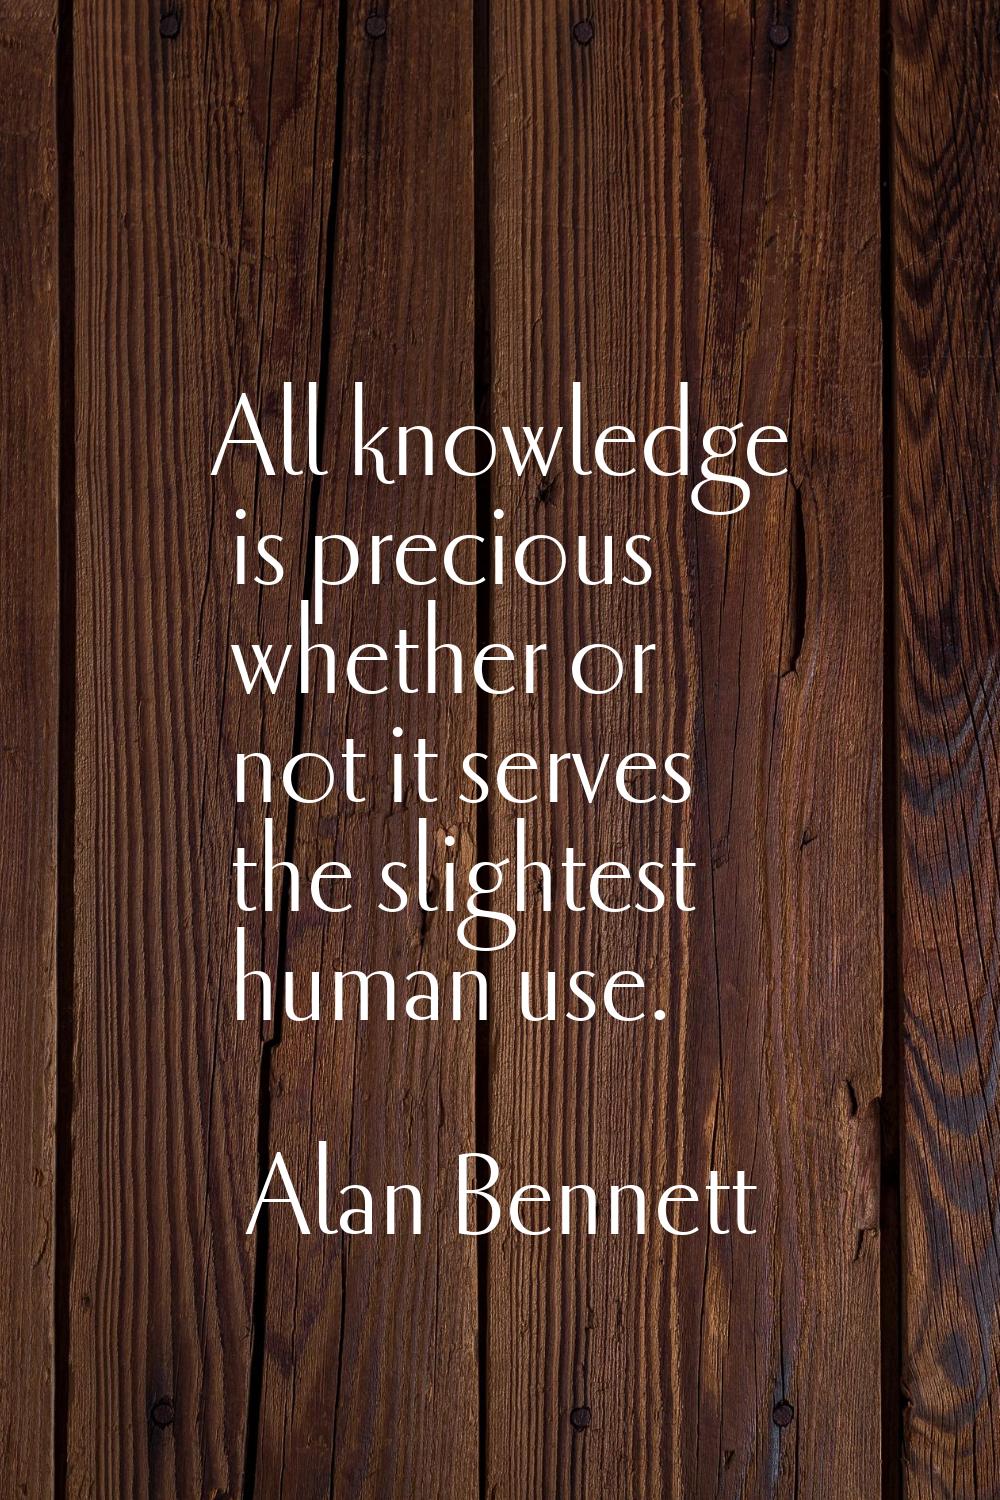 All knowledge is precious whether or not it serves the slightest human use.